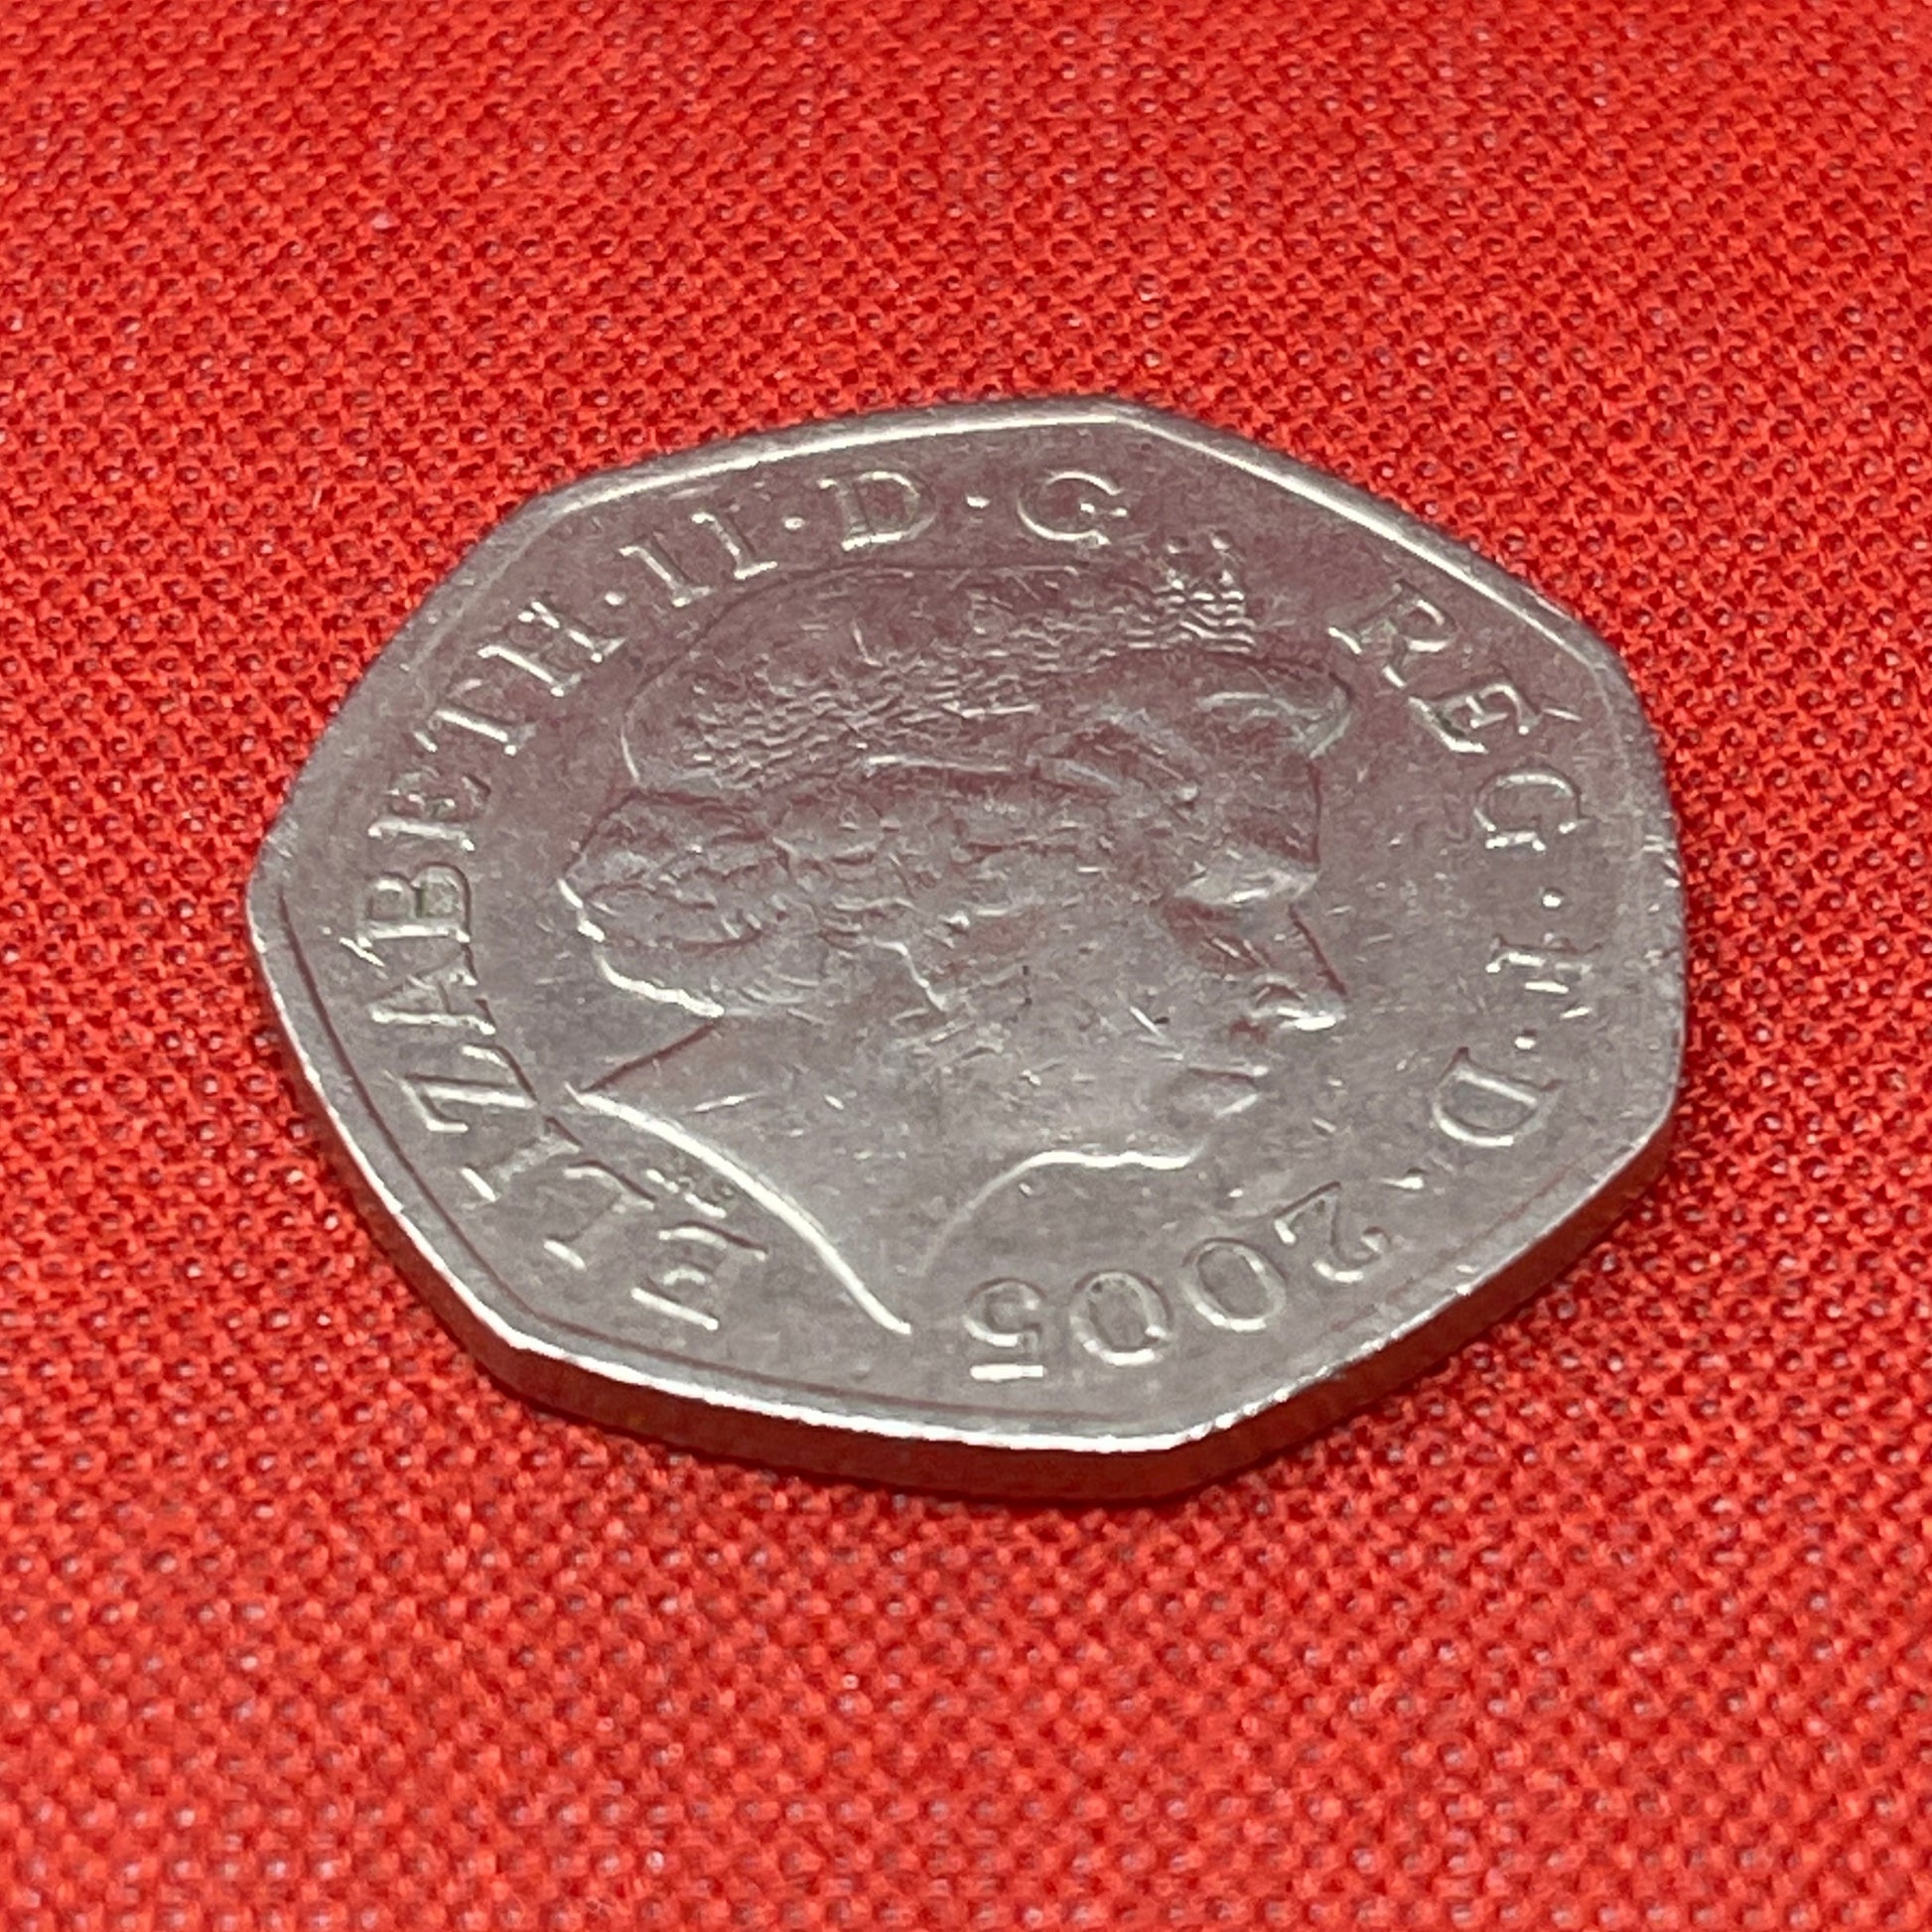 Plural of Penny 50p and the Saxon 50p. Circulated